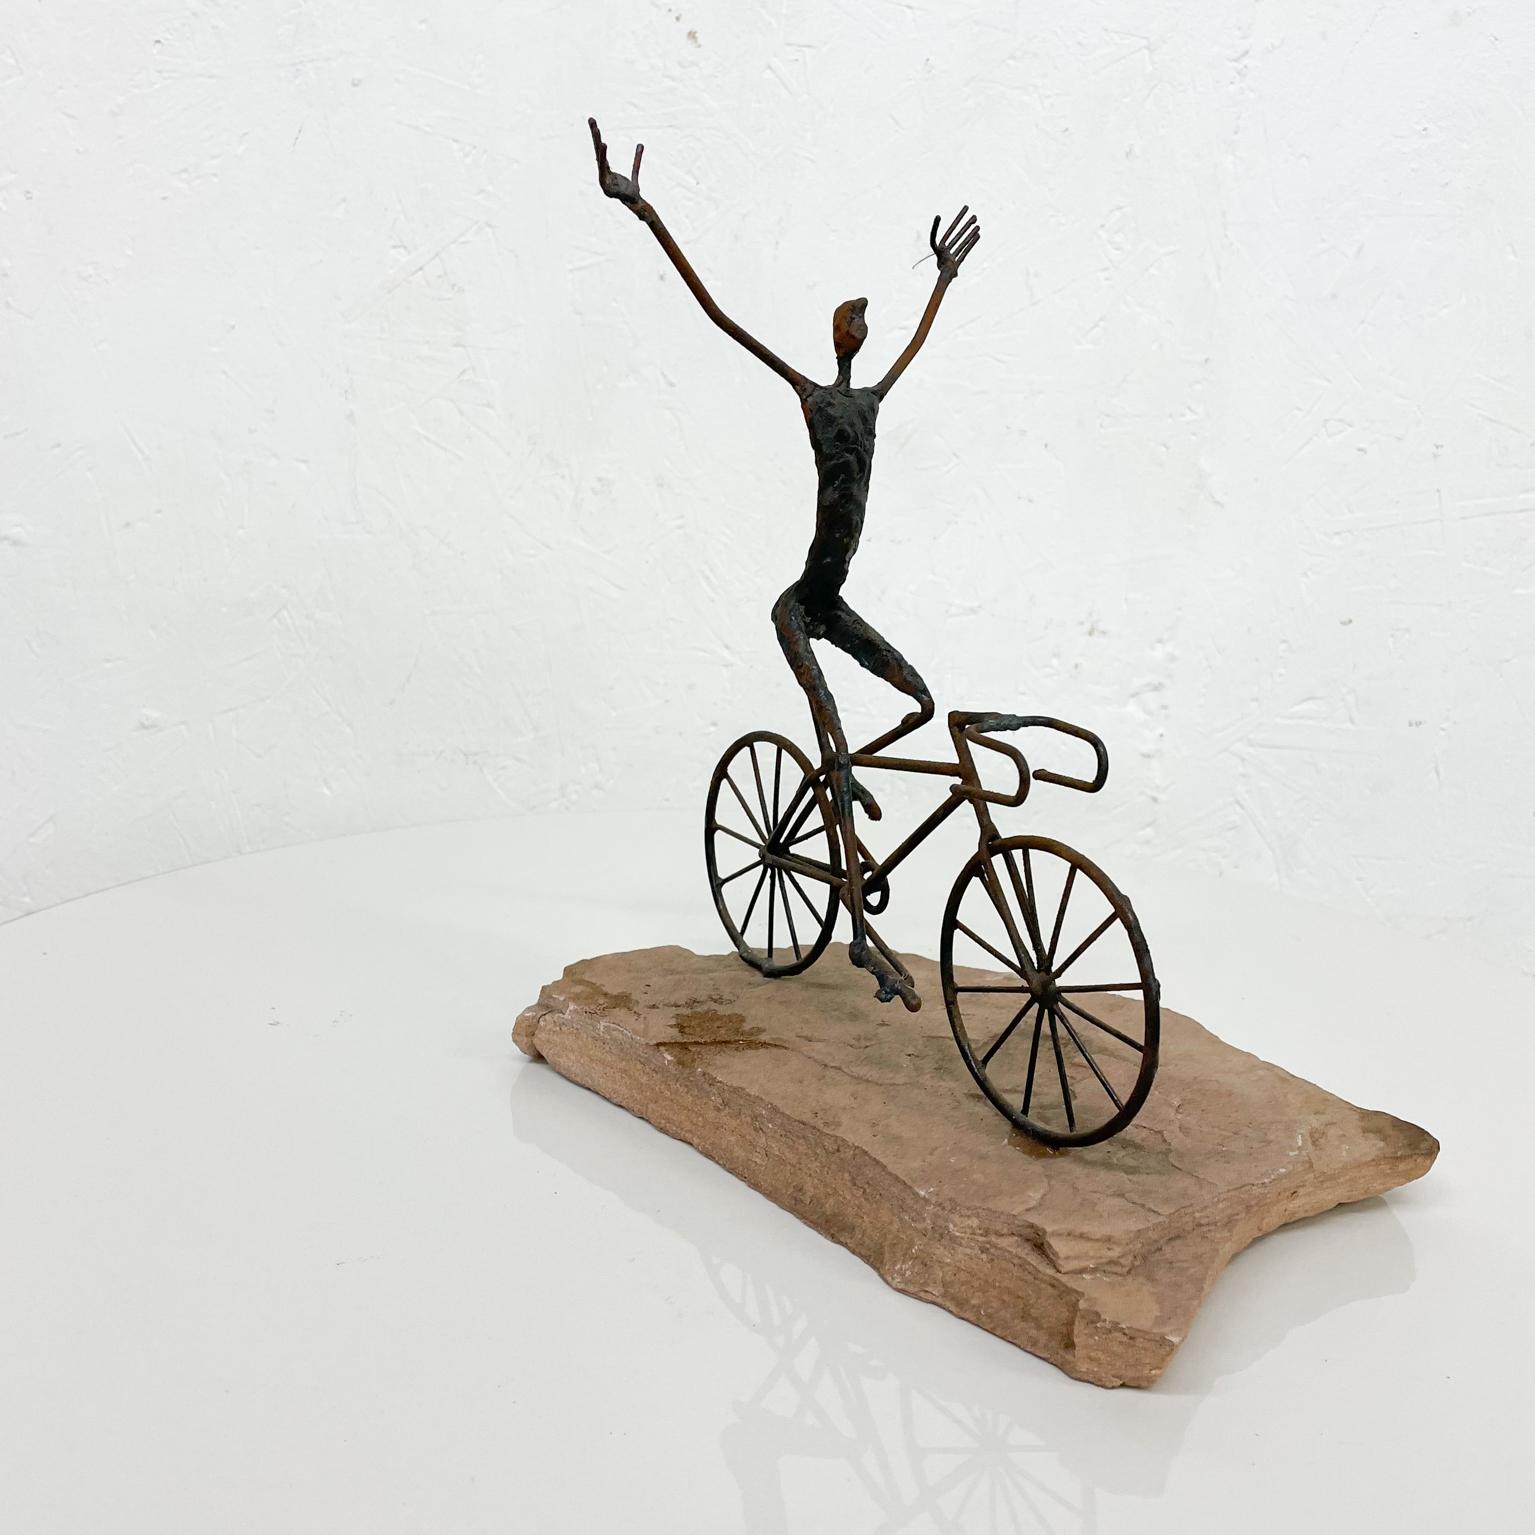 Bicycle Art Metal Sculpture on Stone in the Style of Jack Boyd 1970s 3